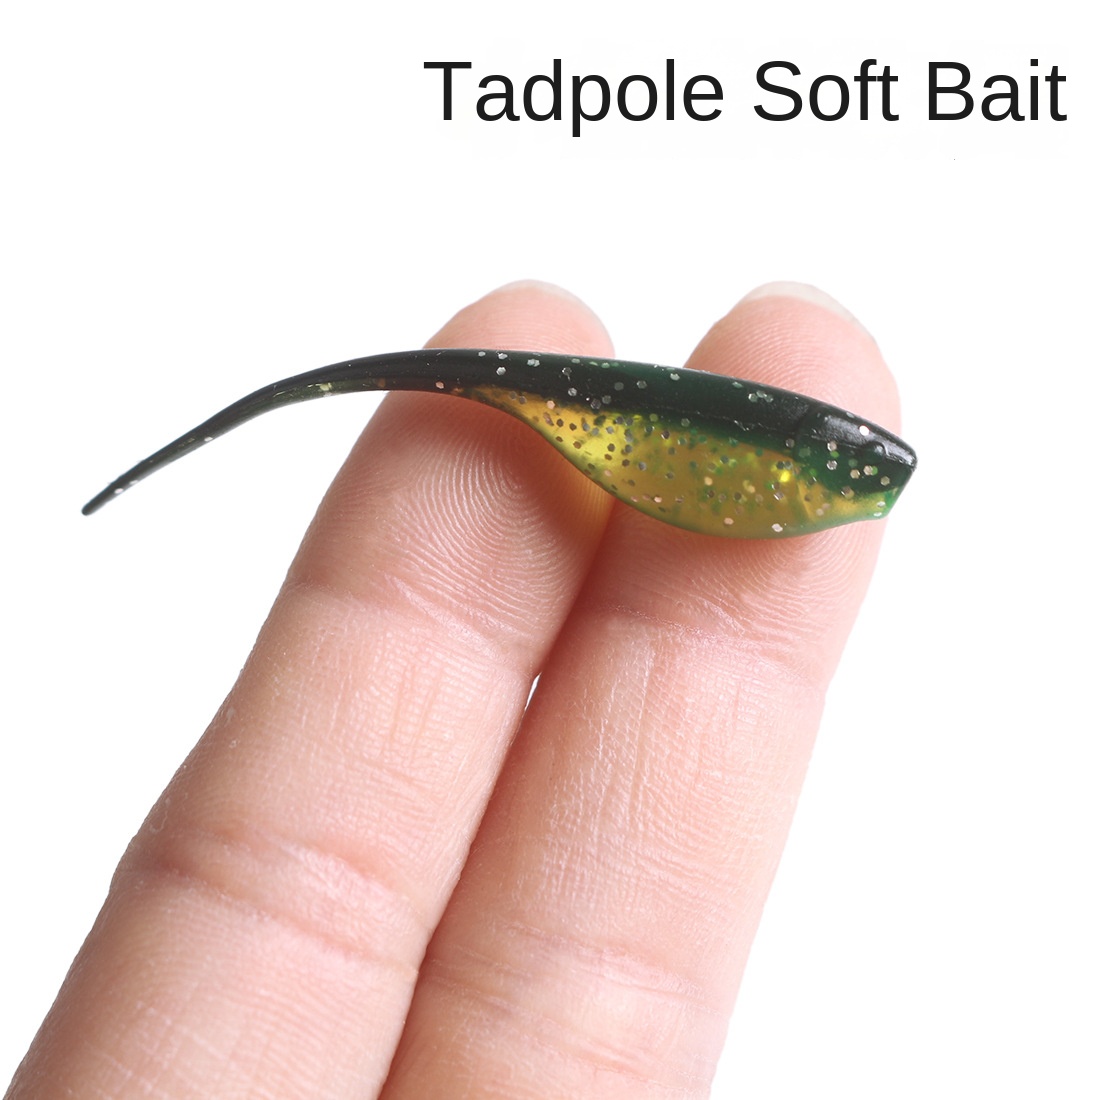 20pcs Bionic Soft Bait Lures - Perfect for Bass, Perch & More - Small  Tadpole Soft Fishing Lure - 0.7g/5cm/1.97inch